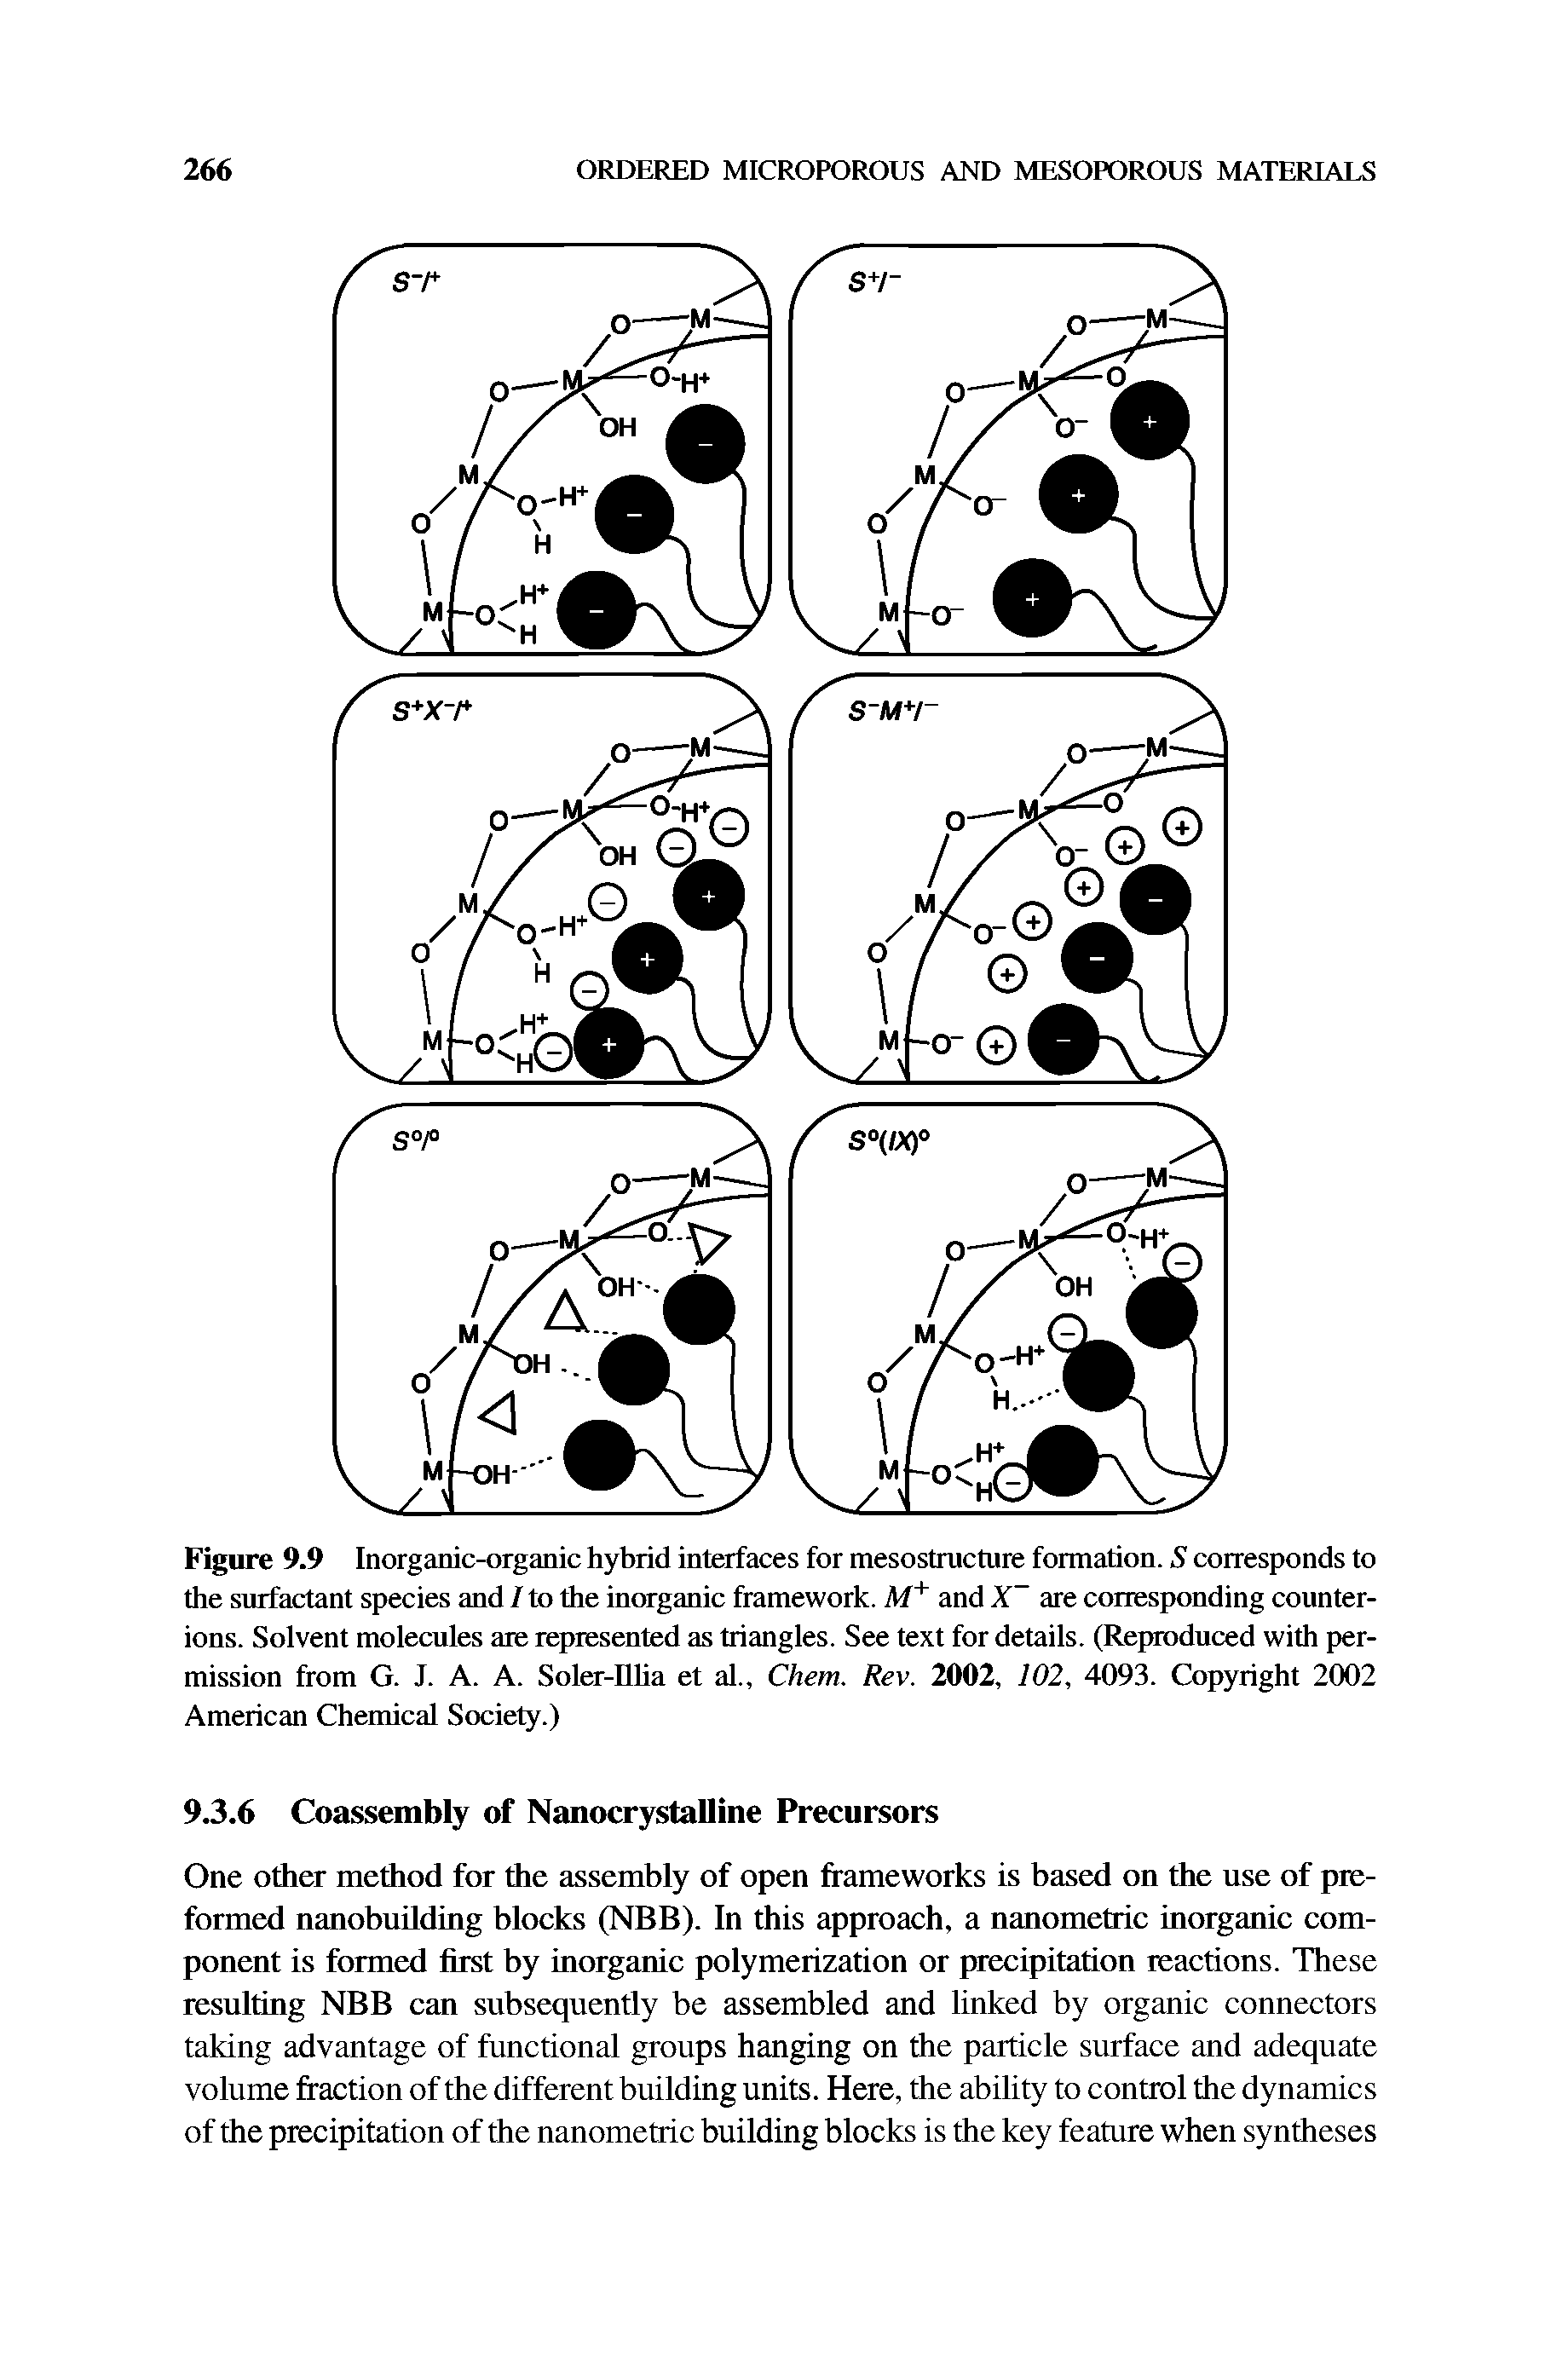 Figure 9.9 Inorganic-organic hybrid interfaces for mesostructure formation. S corresponds to the surfactant species and I to the inorganic framework. M and X are corresponding counterions. Solvent molecules are represented as triangles. See text for details. (Reproduced with permission from G. J. A. A. Soler-Ilha et al., Chem. Rev. 2002, 102, 4093. Copyright 2002 American Chemical Society.)...